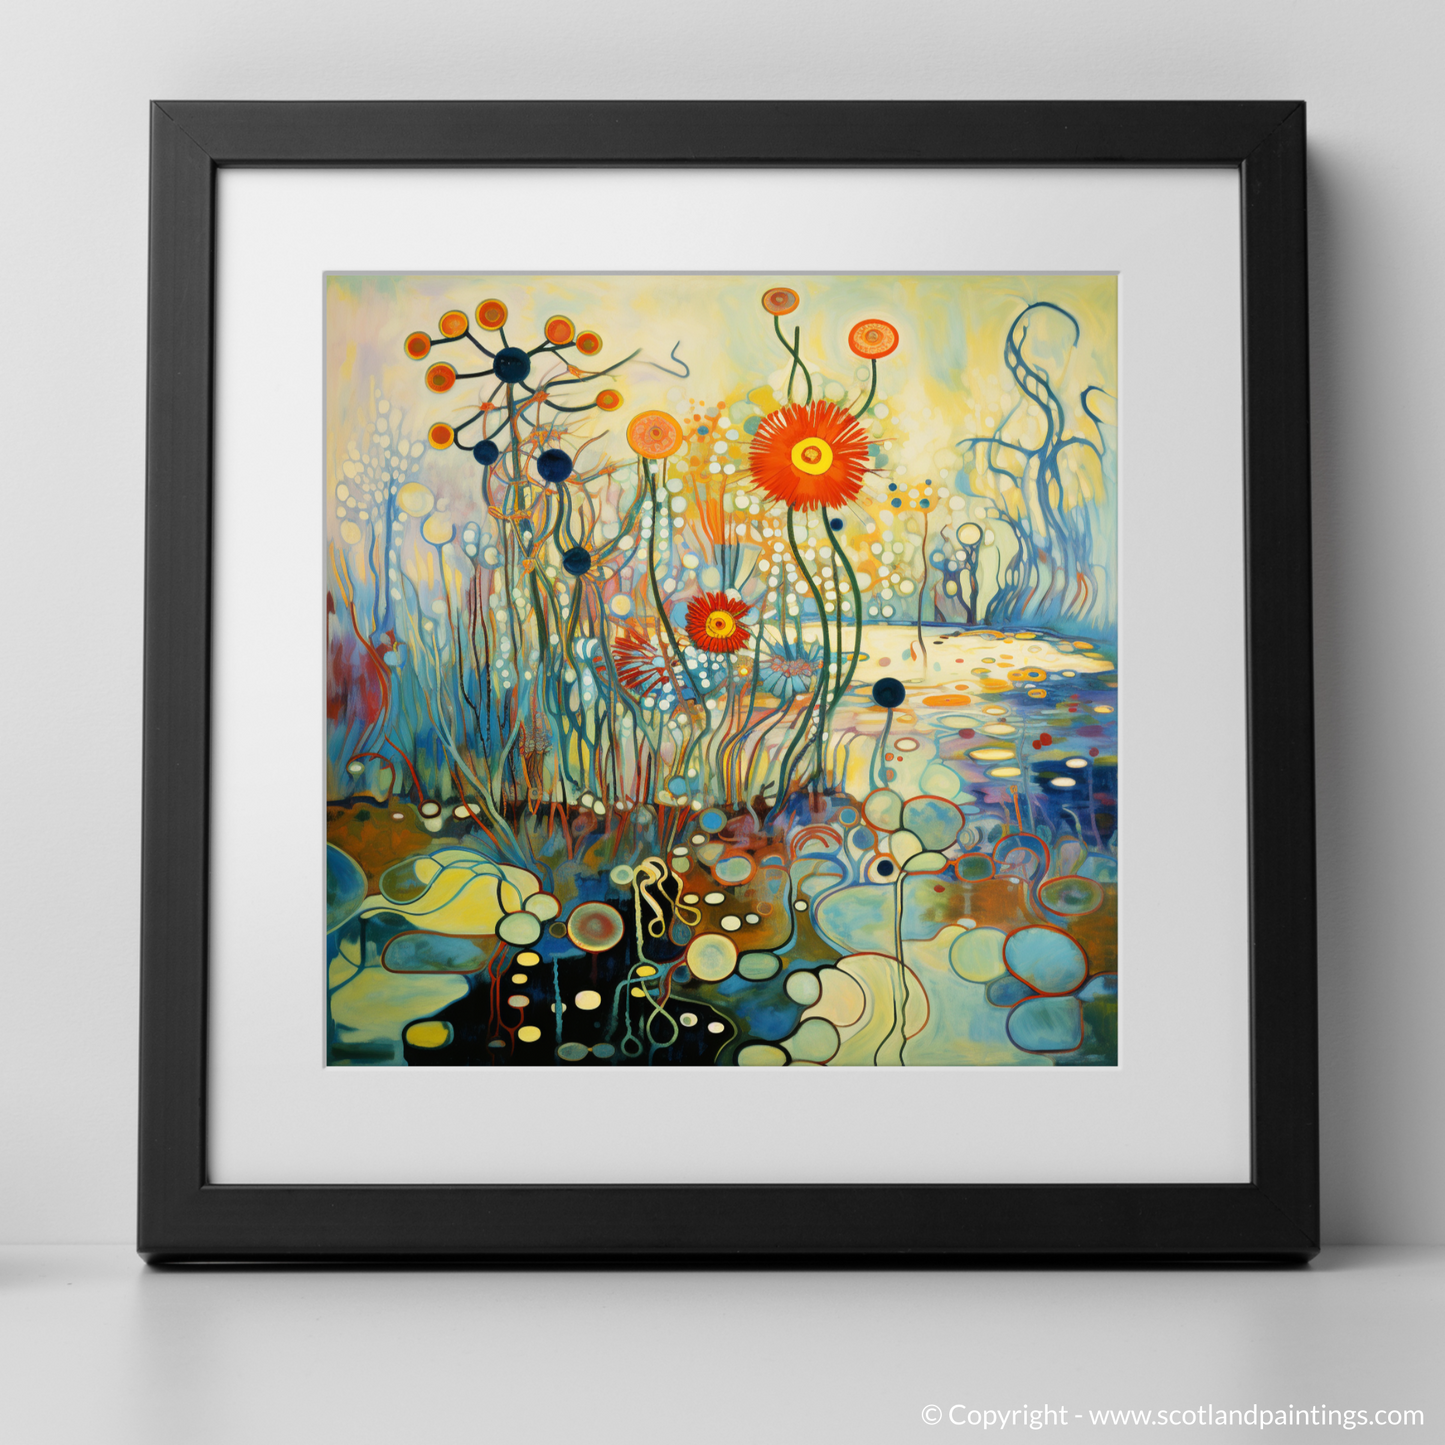 Sundew Whimsy: An Abstract Ode to Flow Country Wetlands